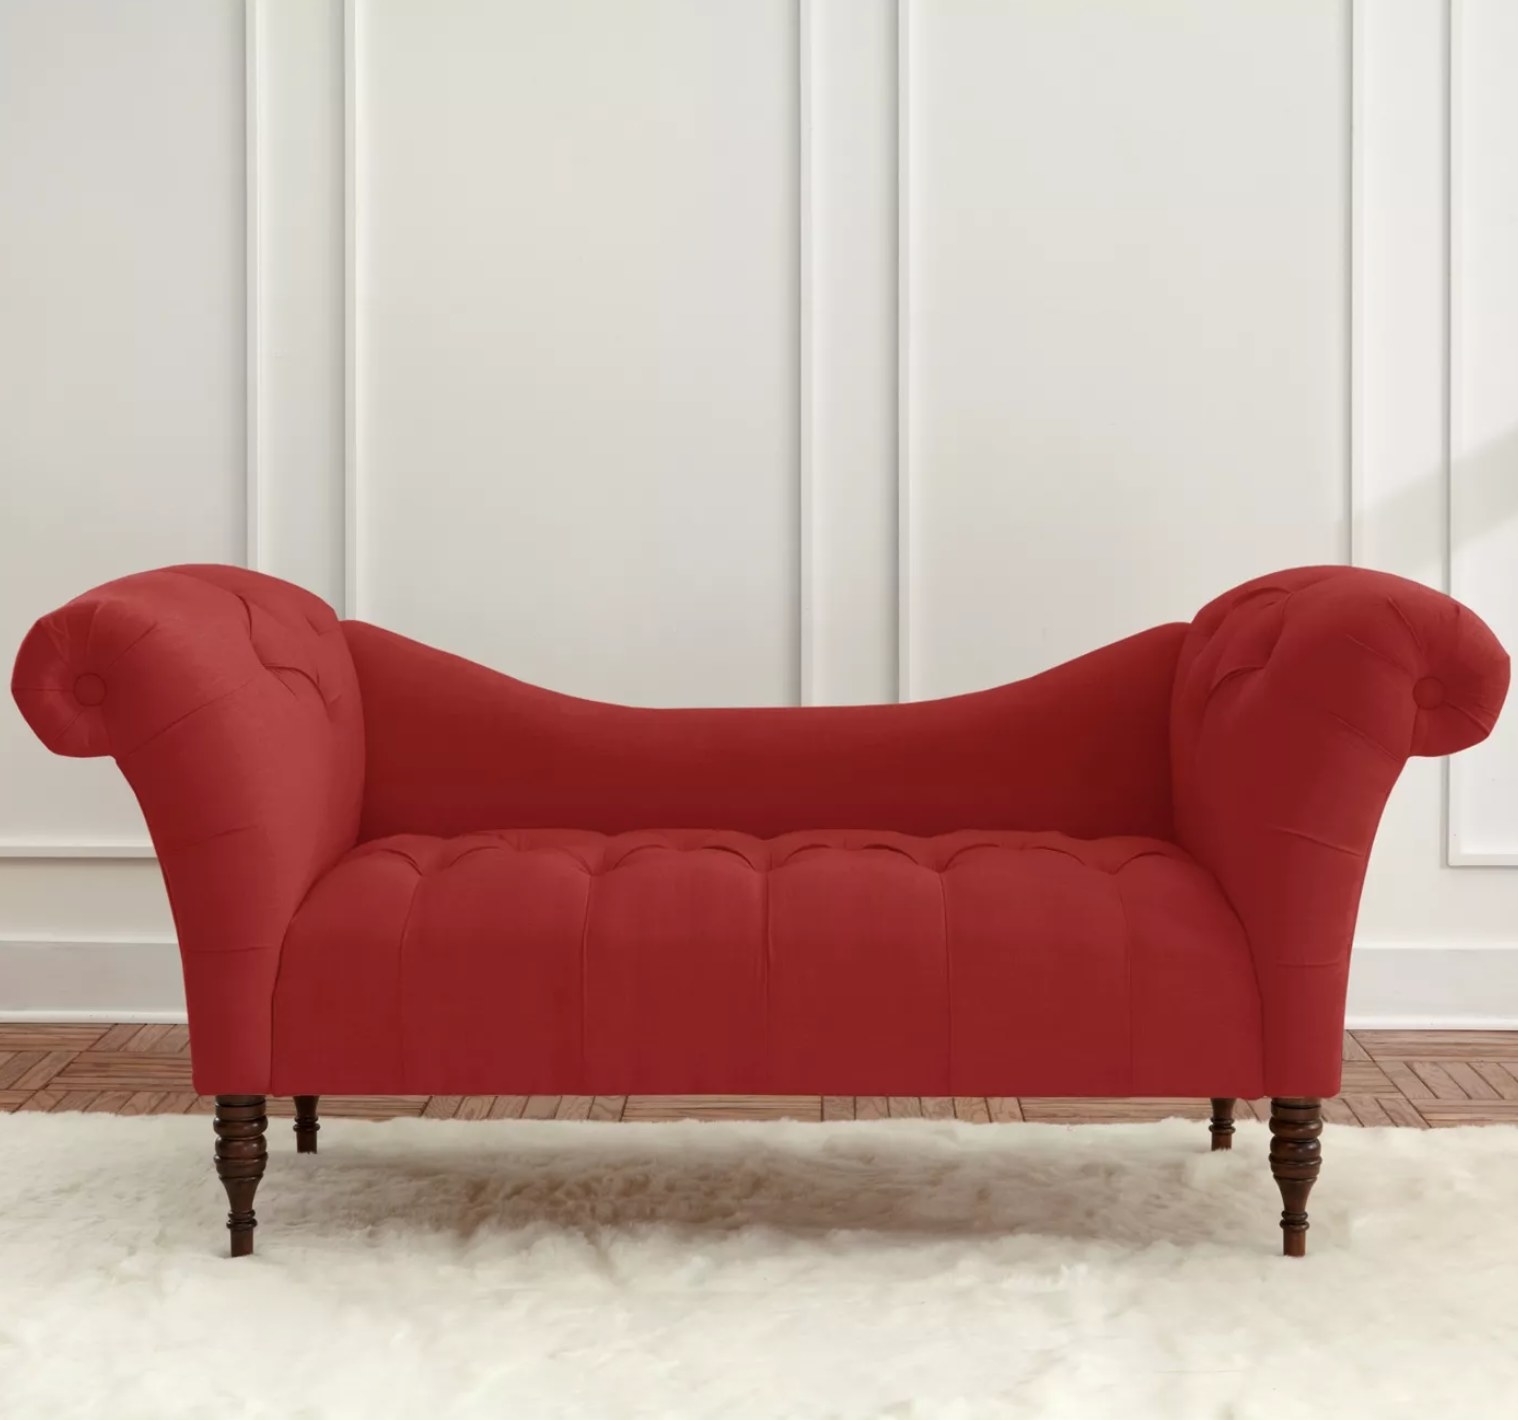 the sofa in red